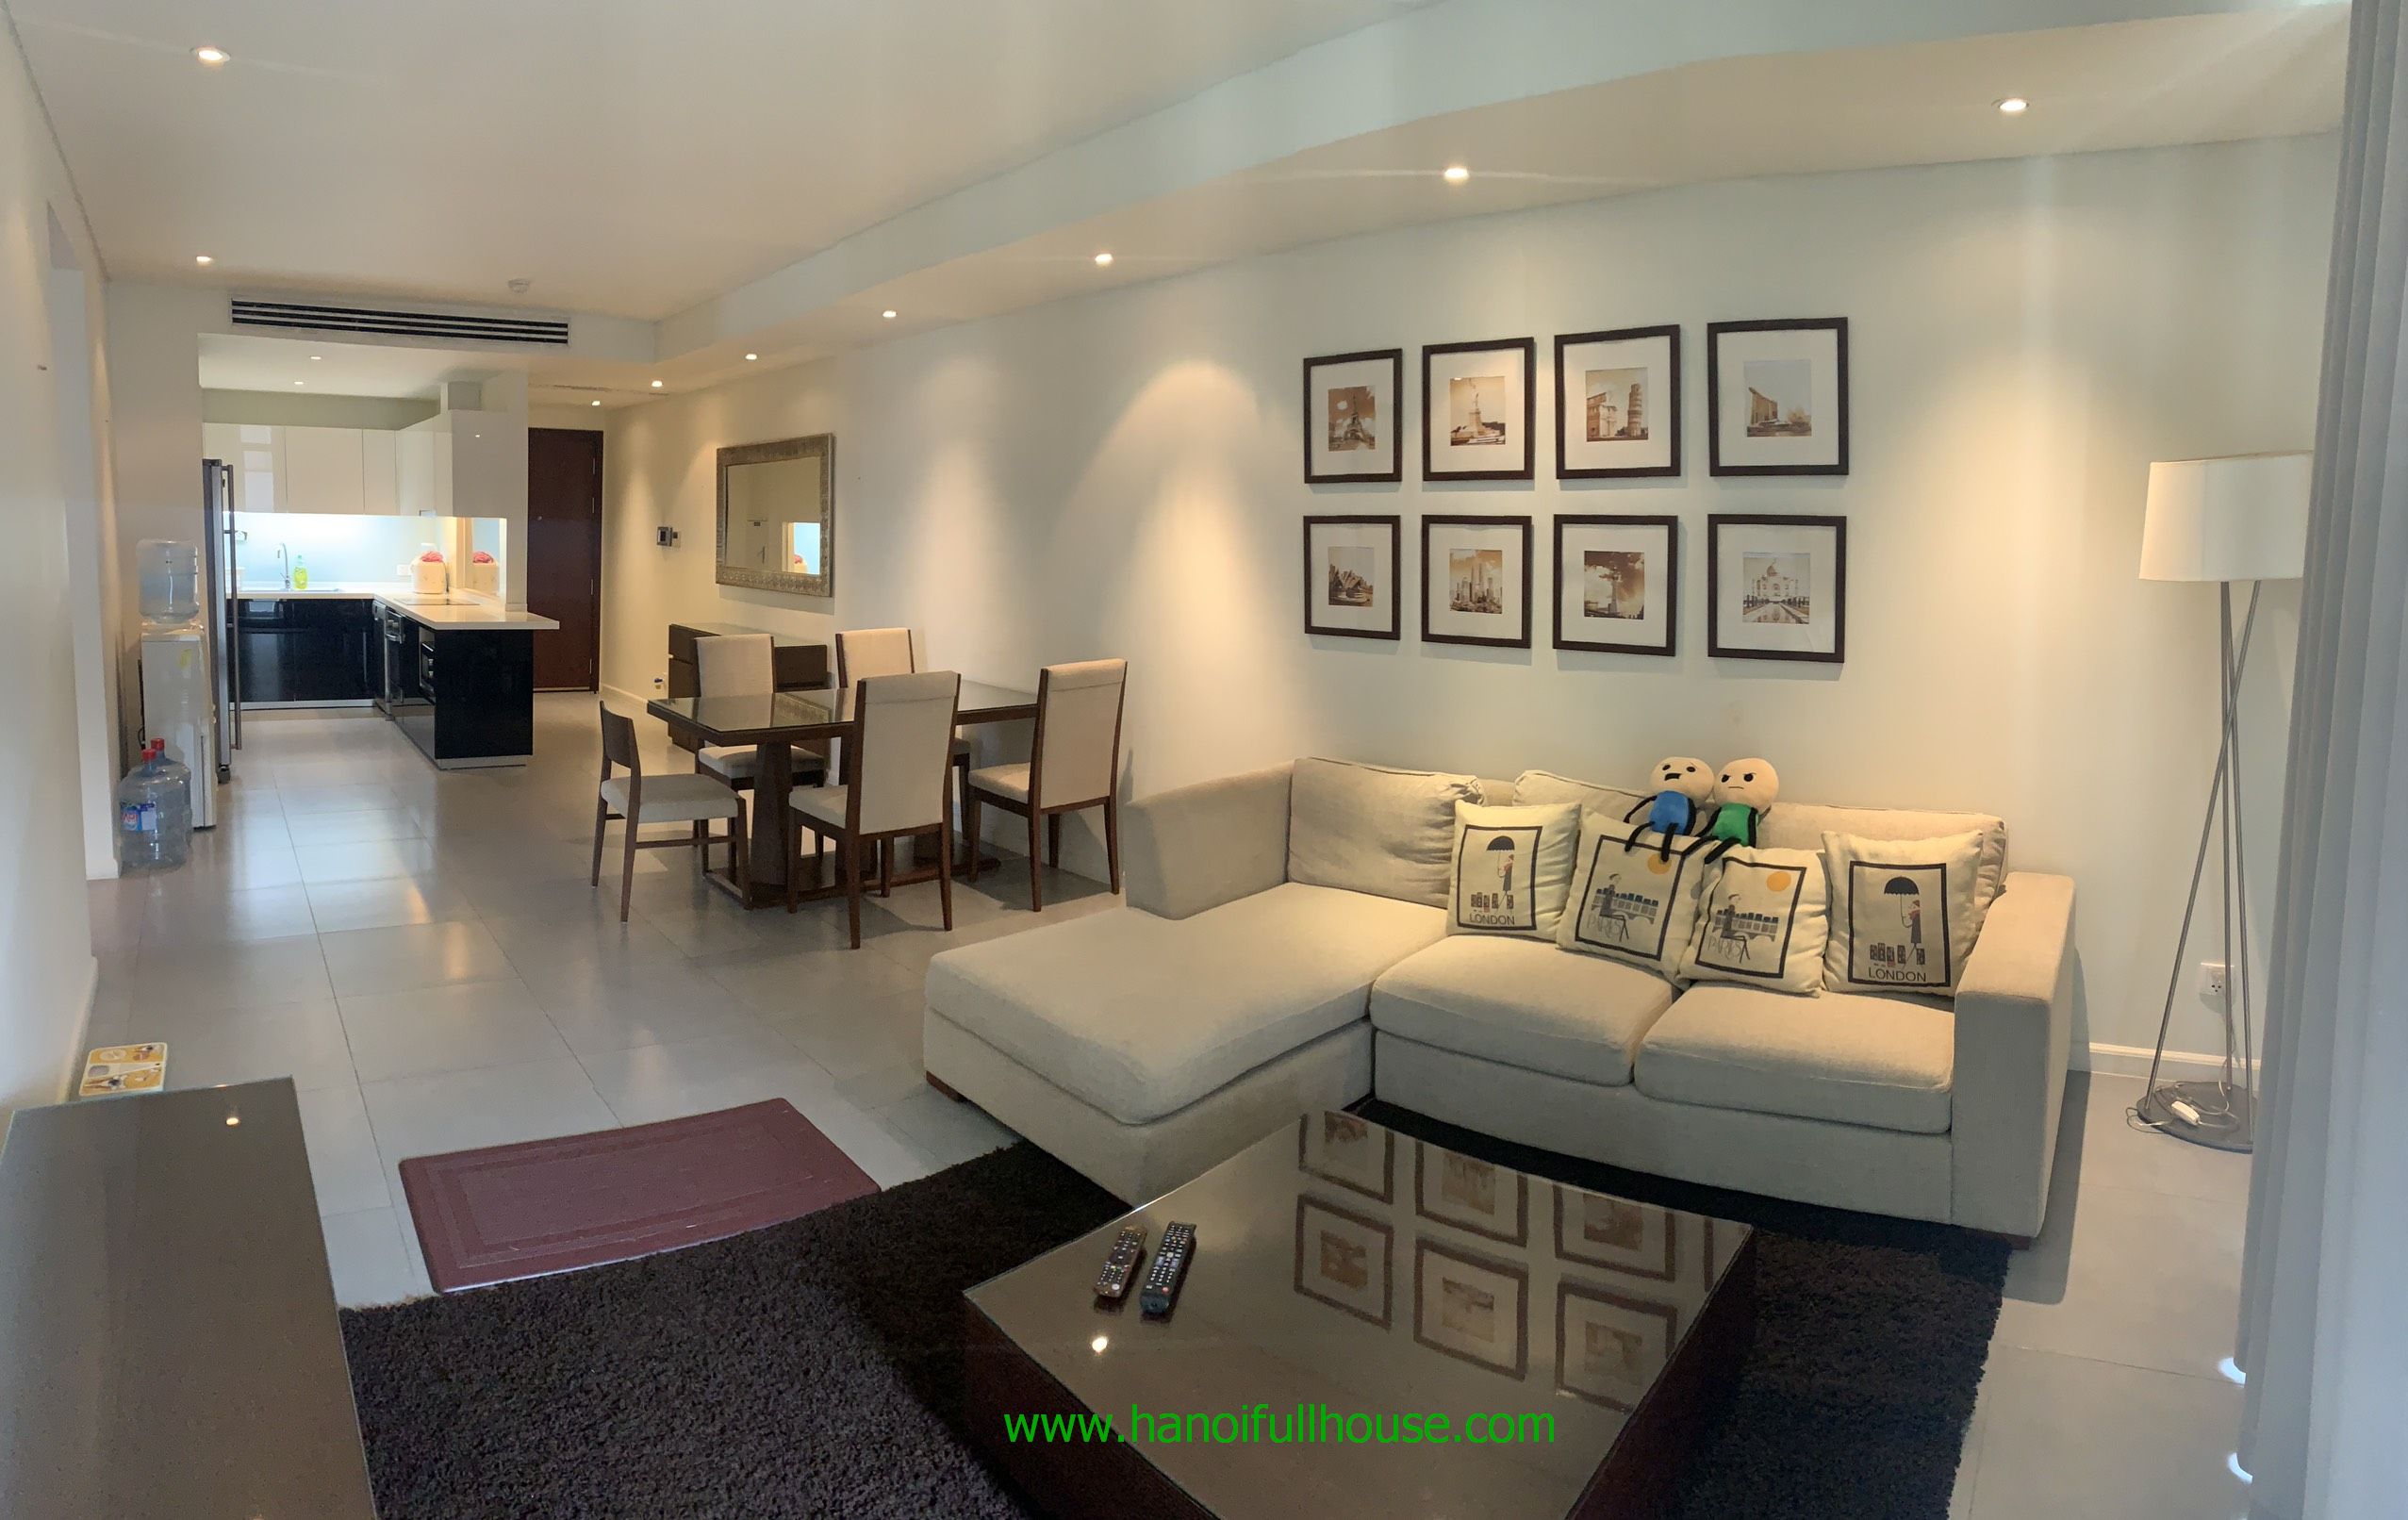 Bright 2 bedroom apartment in Watermark Lac long Quan, Tayho. Swimming pool, gym